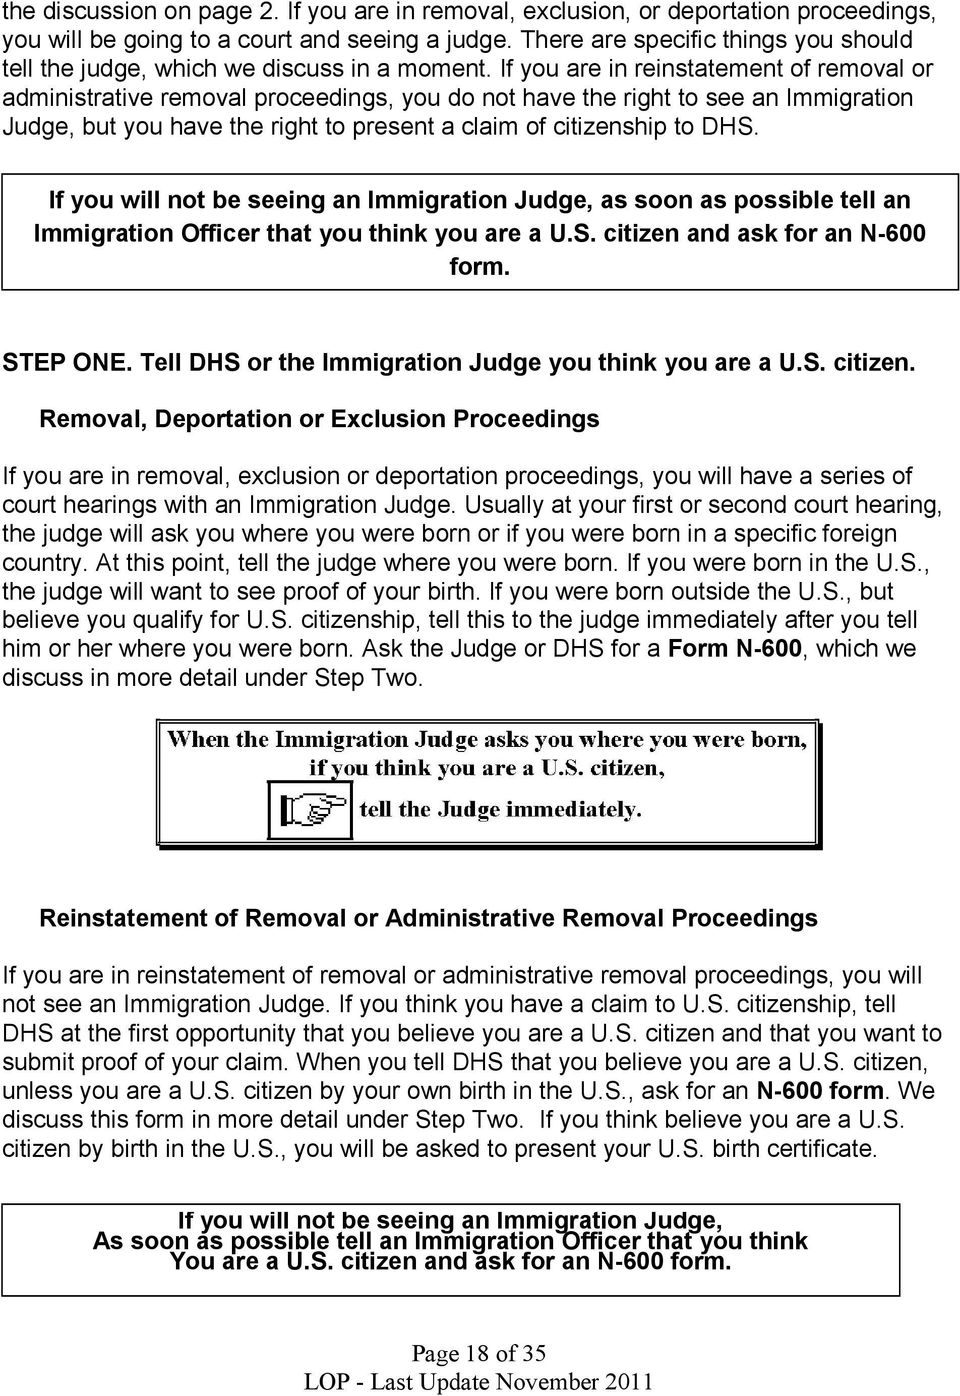 If you are in reinstatement of removal or administrative removal proceedings, you do not have the right to see an Immigration Judge, but you have the right to present a claim of citizenship to DHS.